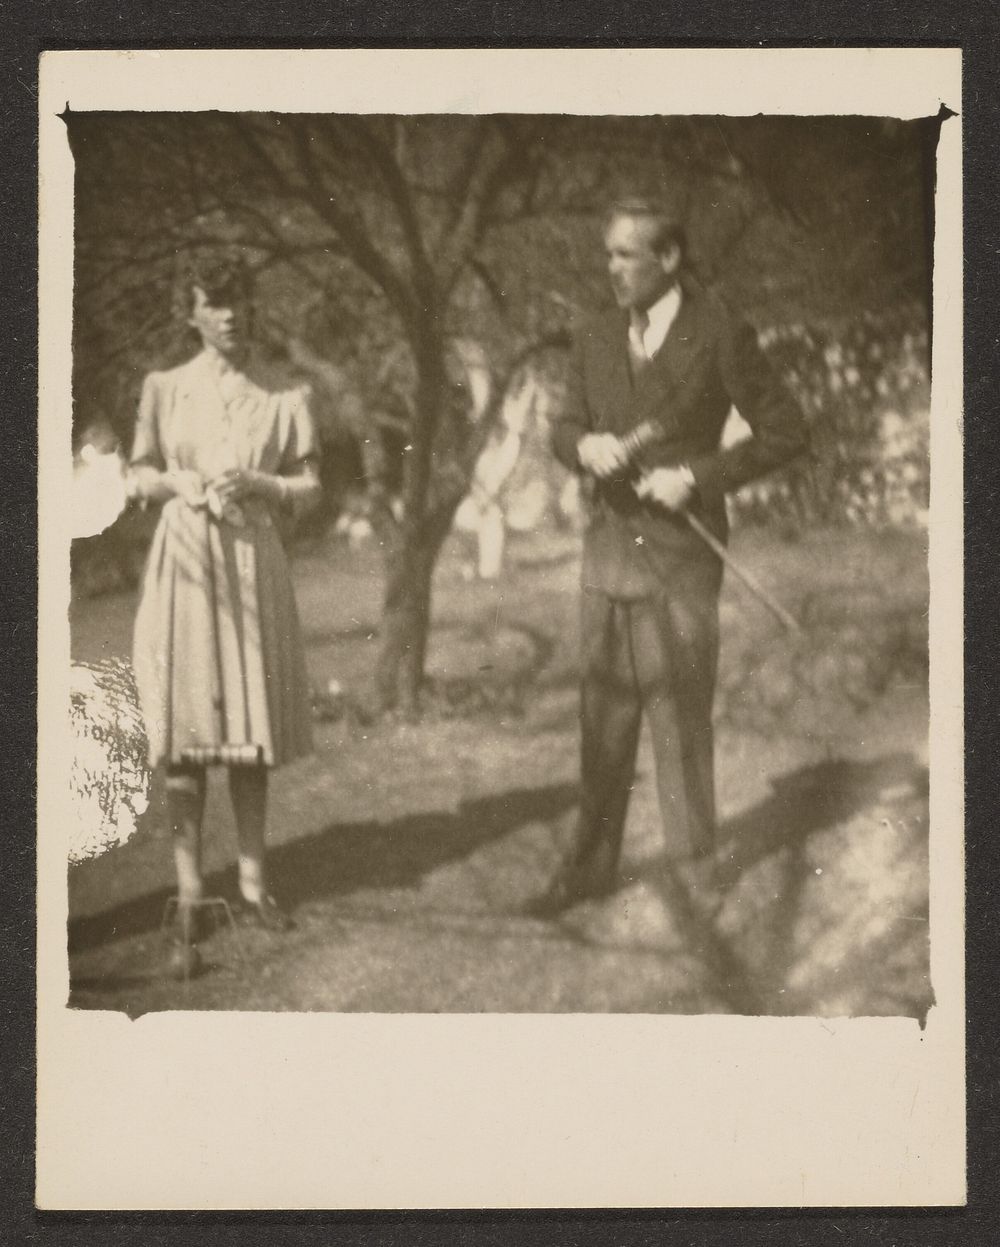 Man and Woman Outside by Louis Fleckenstein